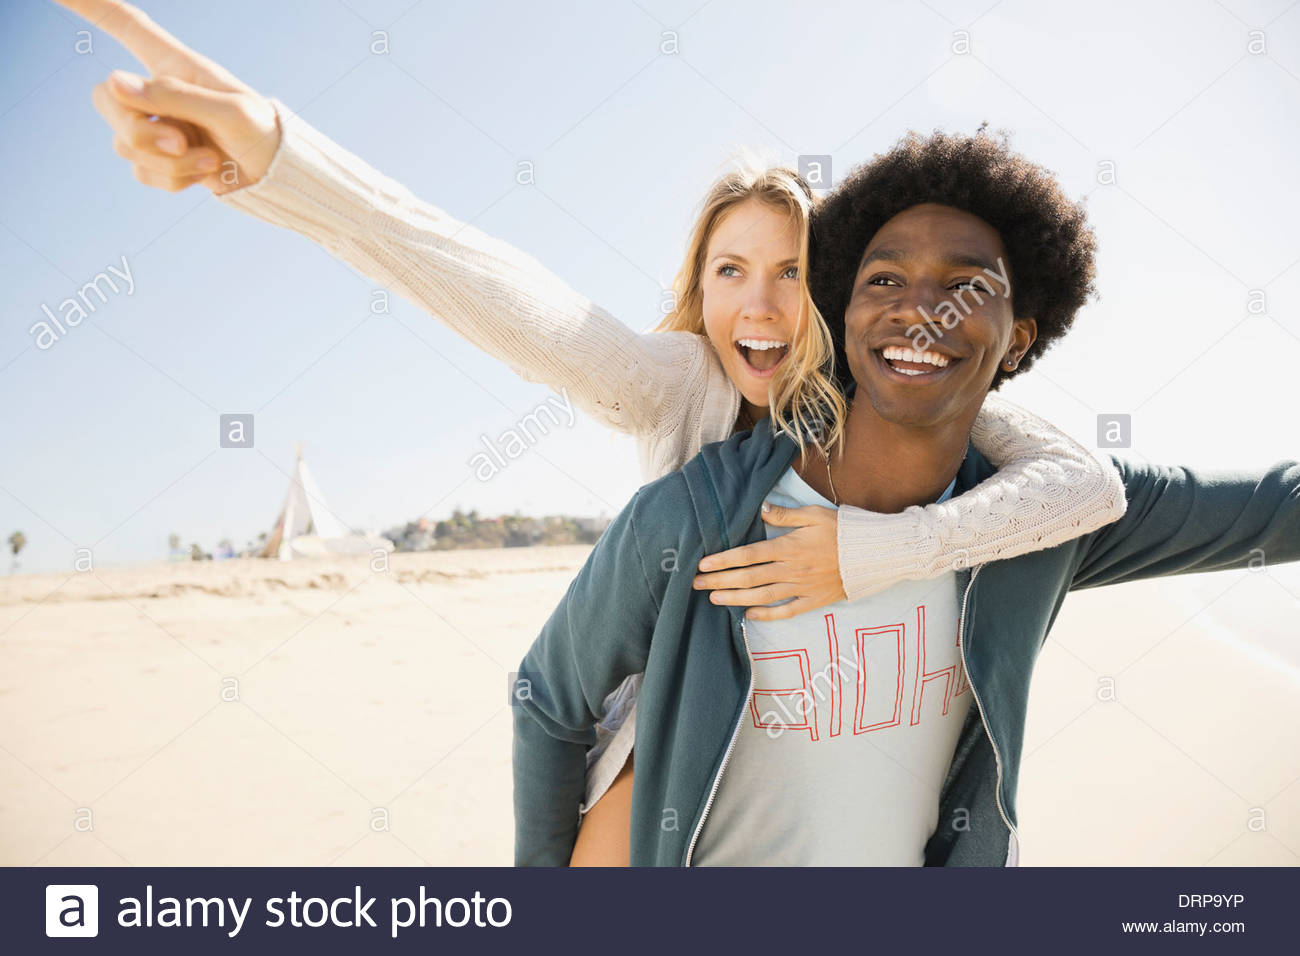 Excited couple on beach Stock Photo